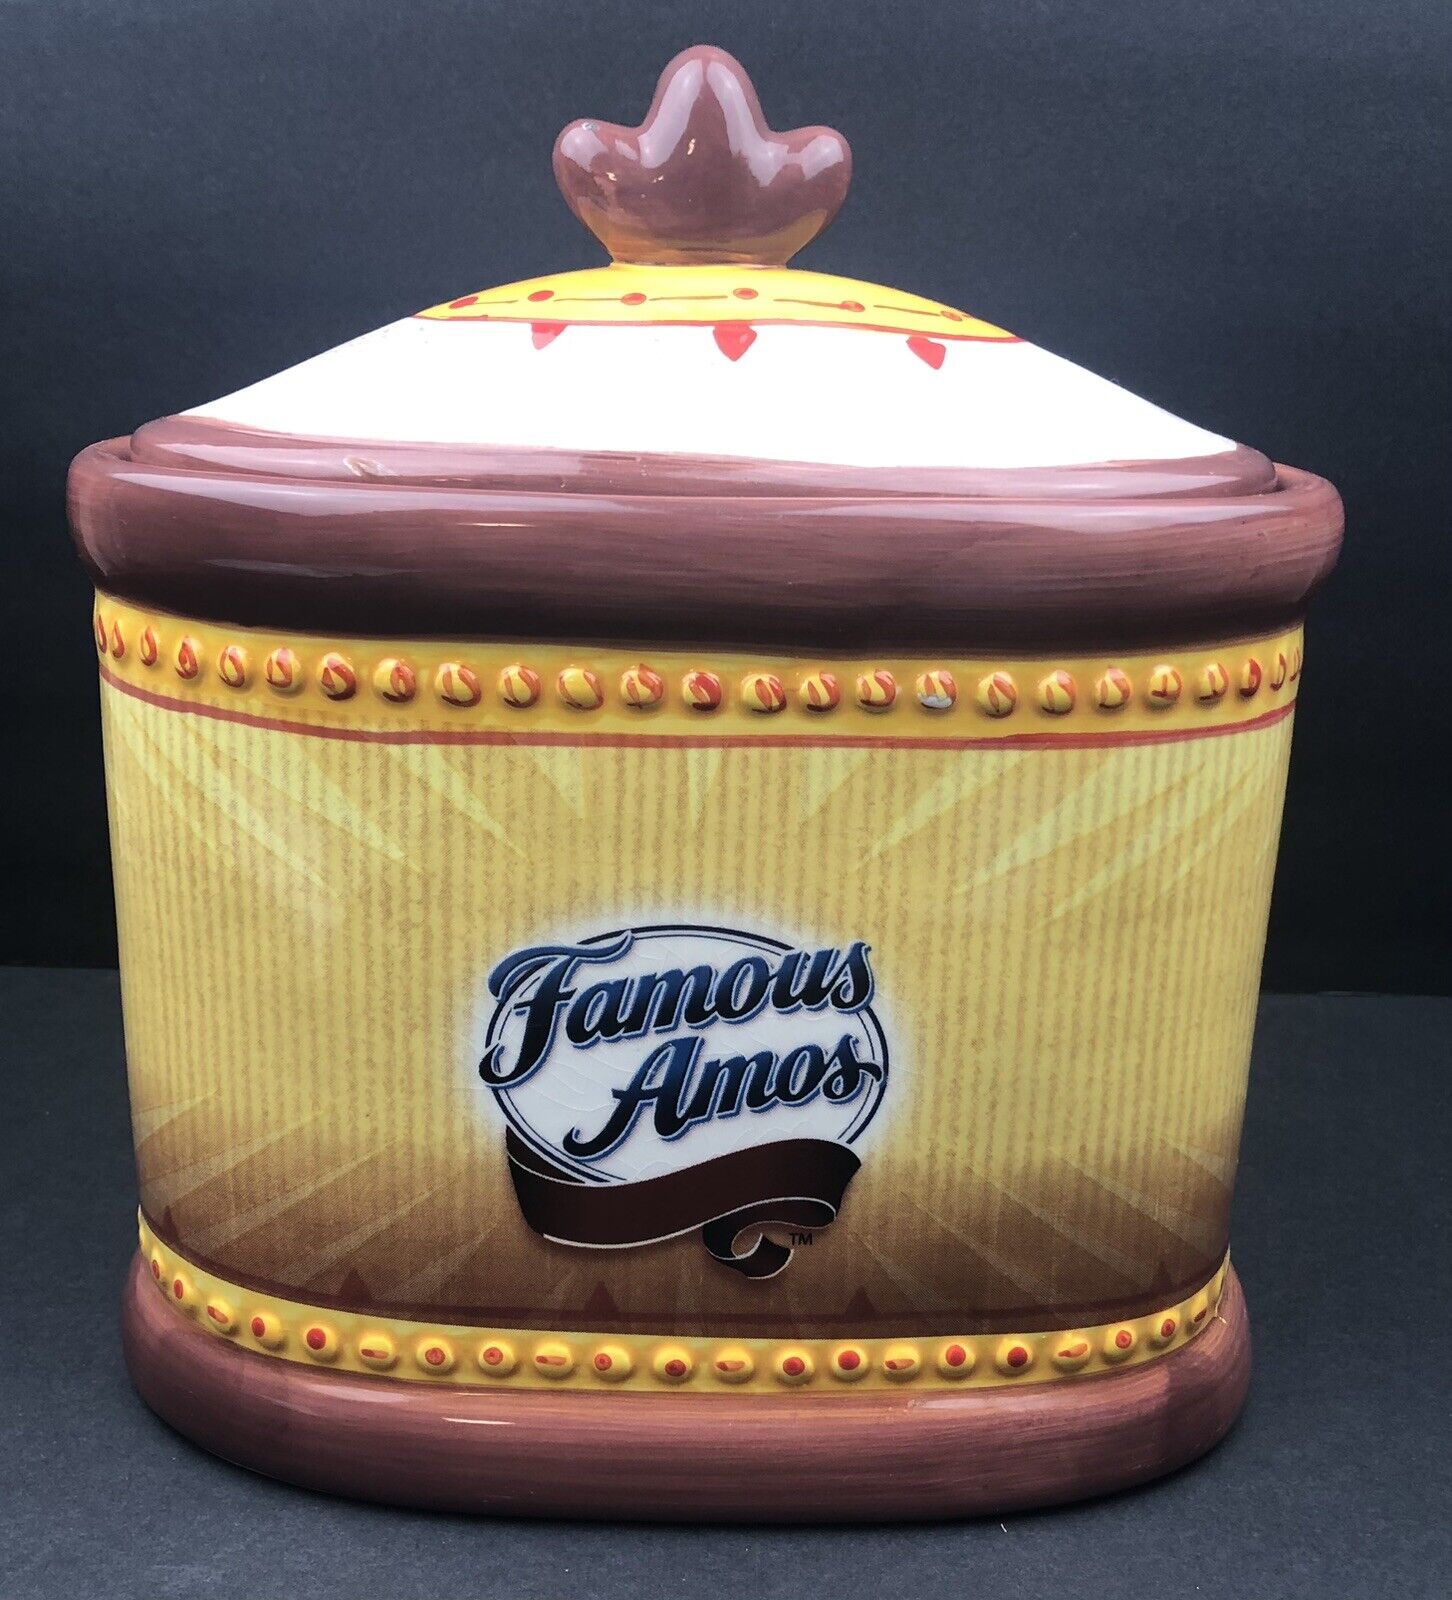 Famous Amos Cookies Hand Painted Cookie Jar By Sherwood 2006 Size 11 x 9 inches